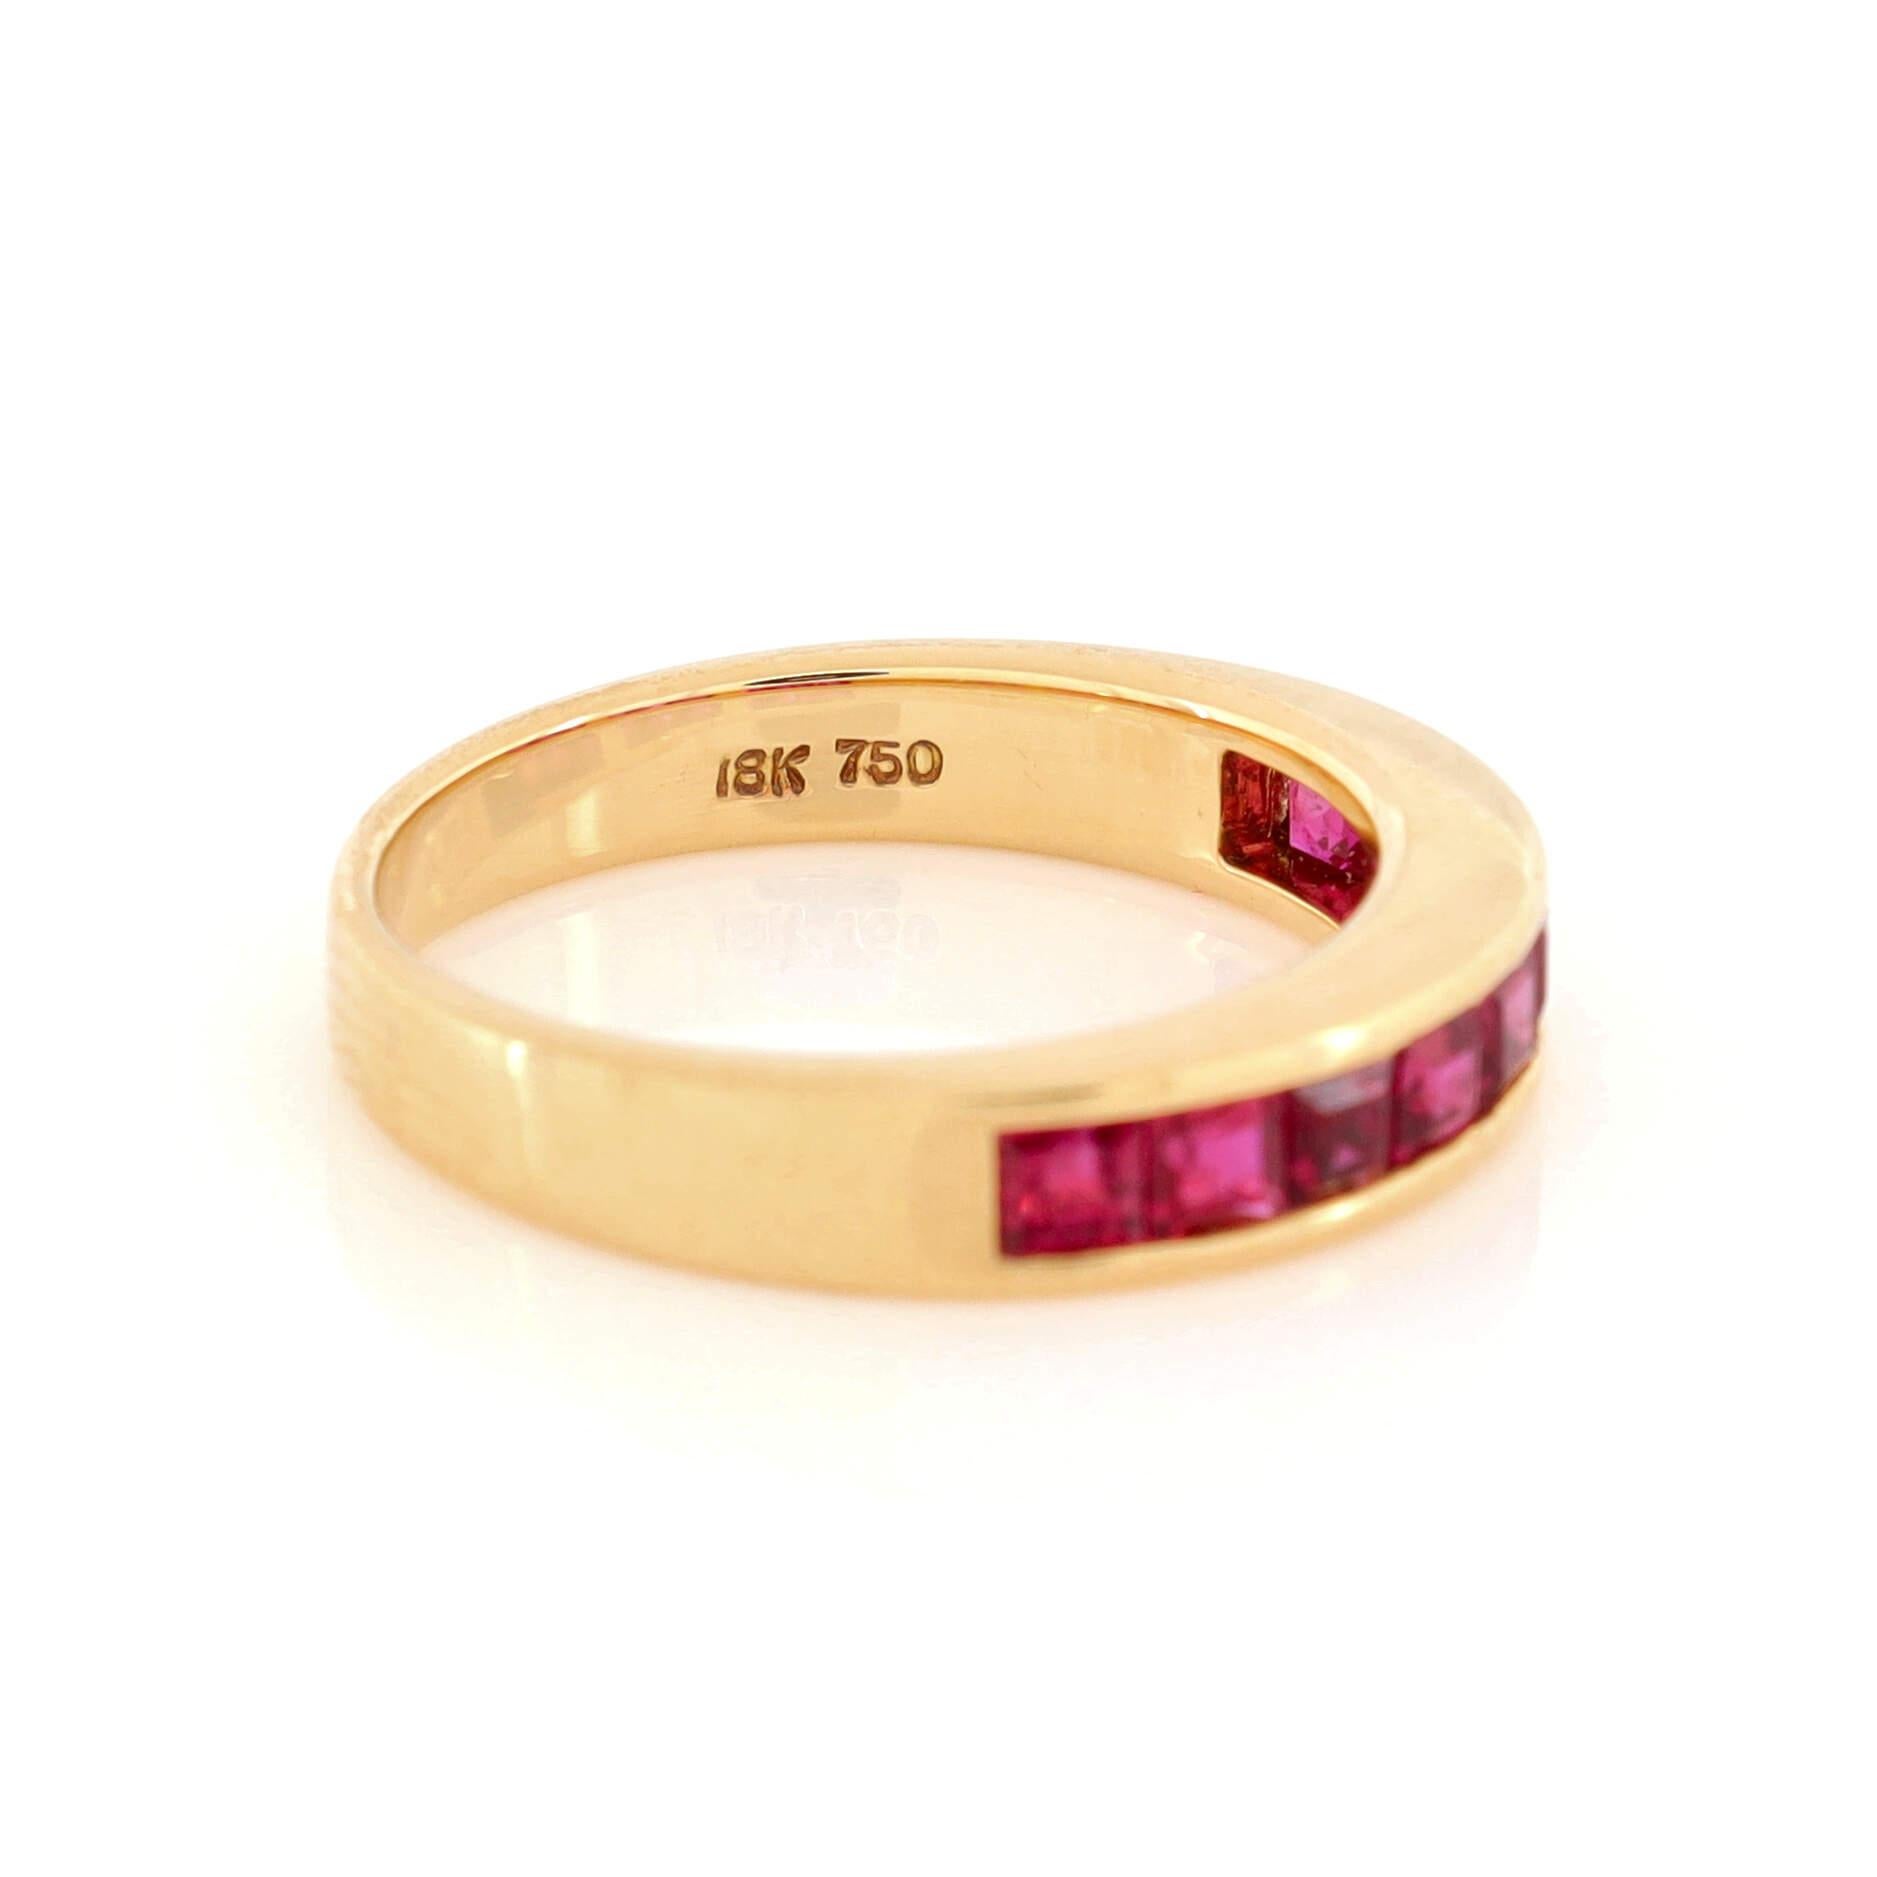 Tiffany & Co. Half Eternity Band Ring 18k Rose Gold with Rubies 1